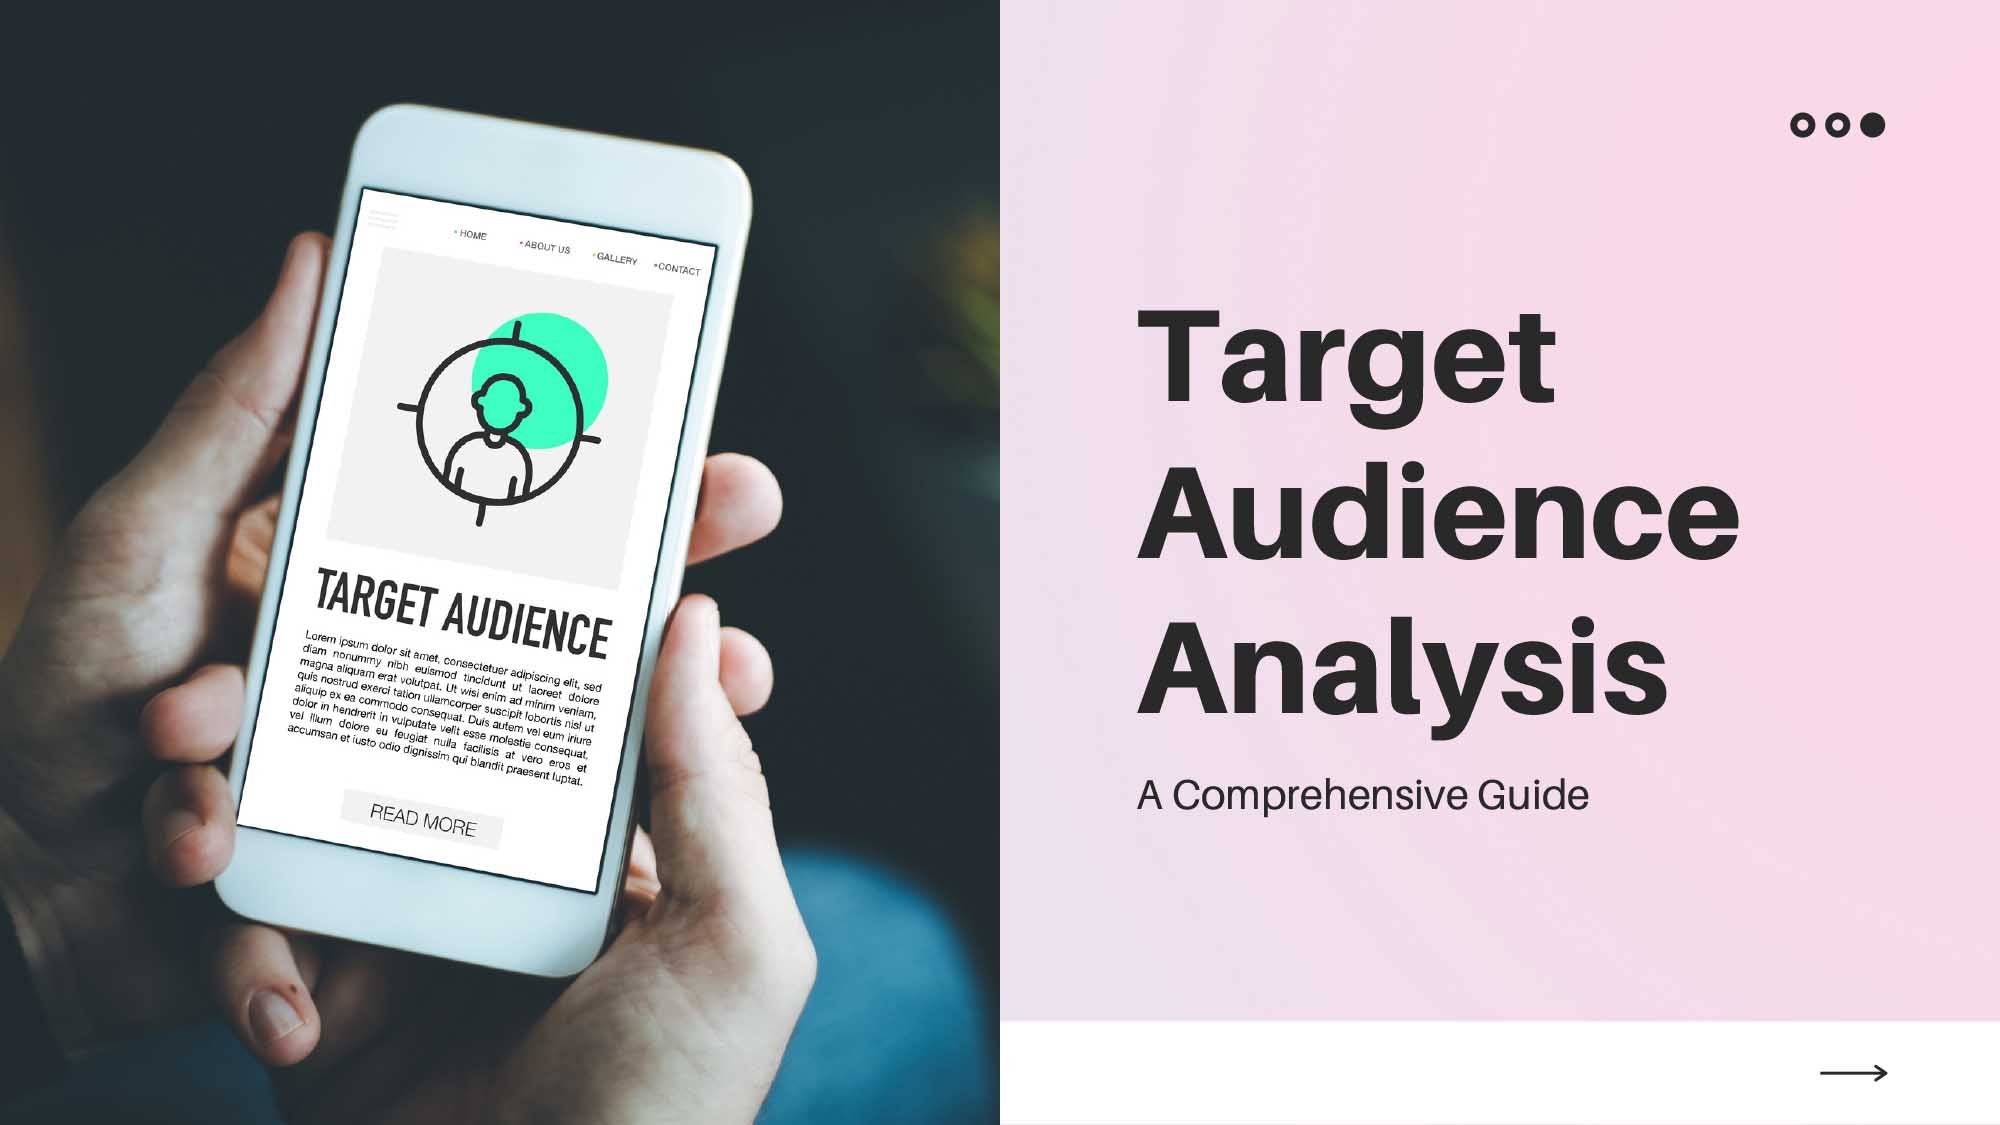 A Comprehensive Guide on Target Audience Analysis in Business